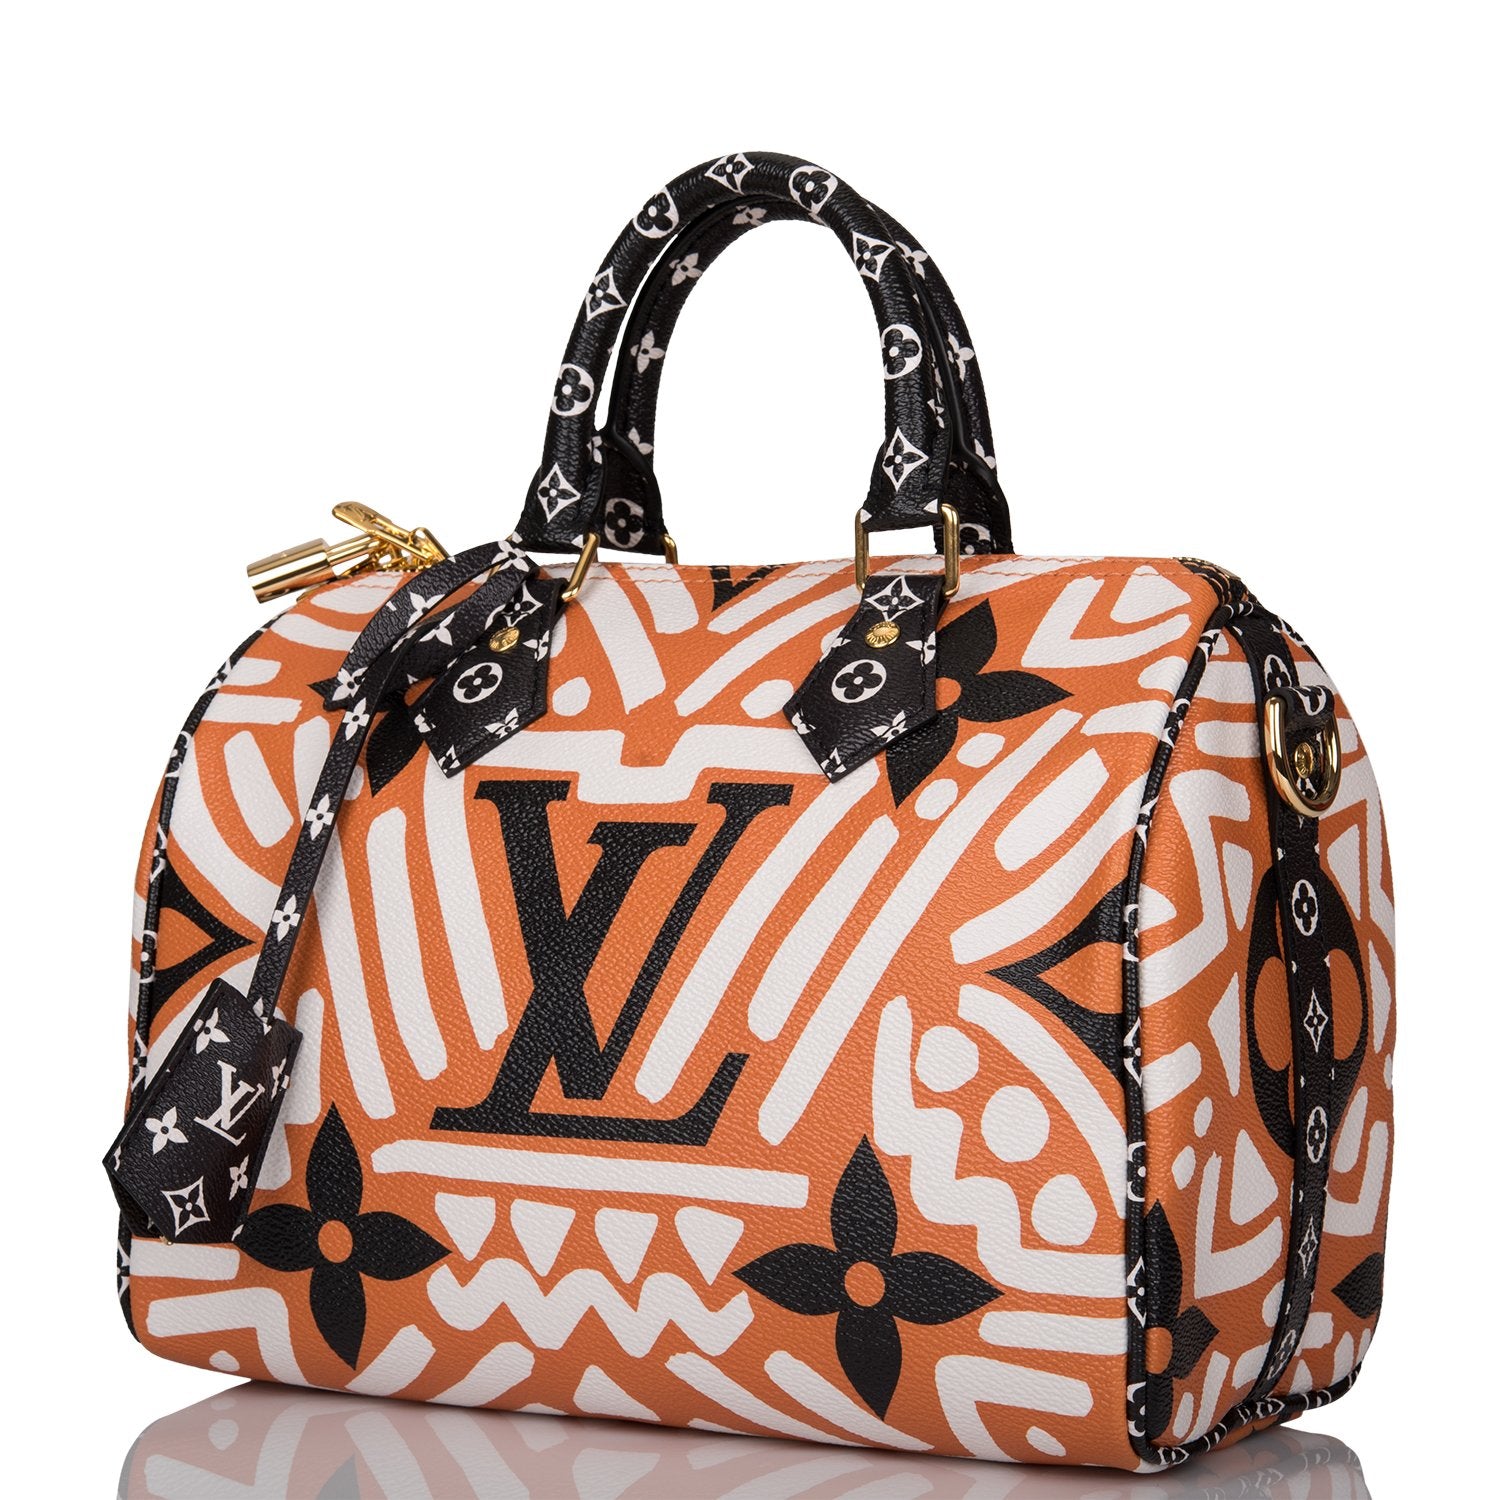 Madison Avenue Couture - The perfect summery tie dye bag